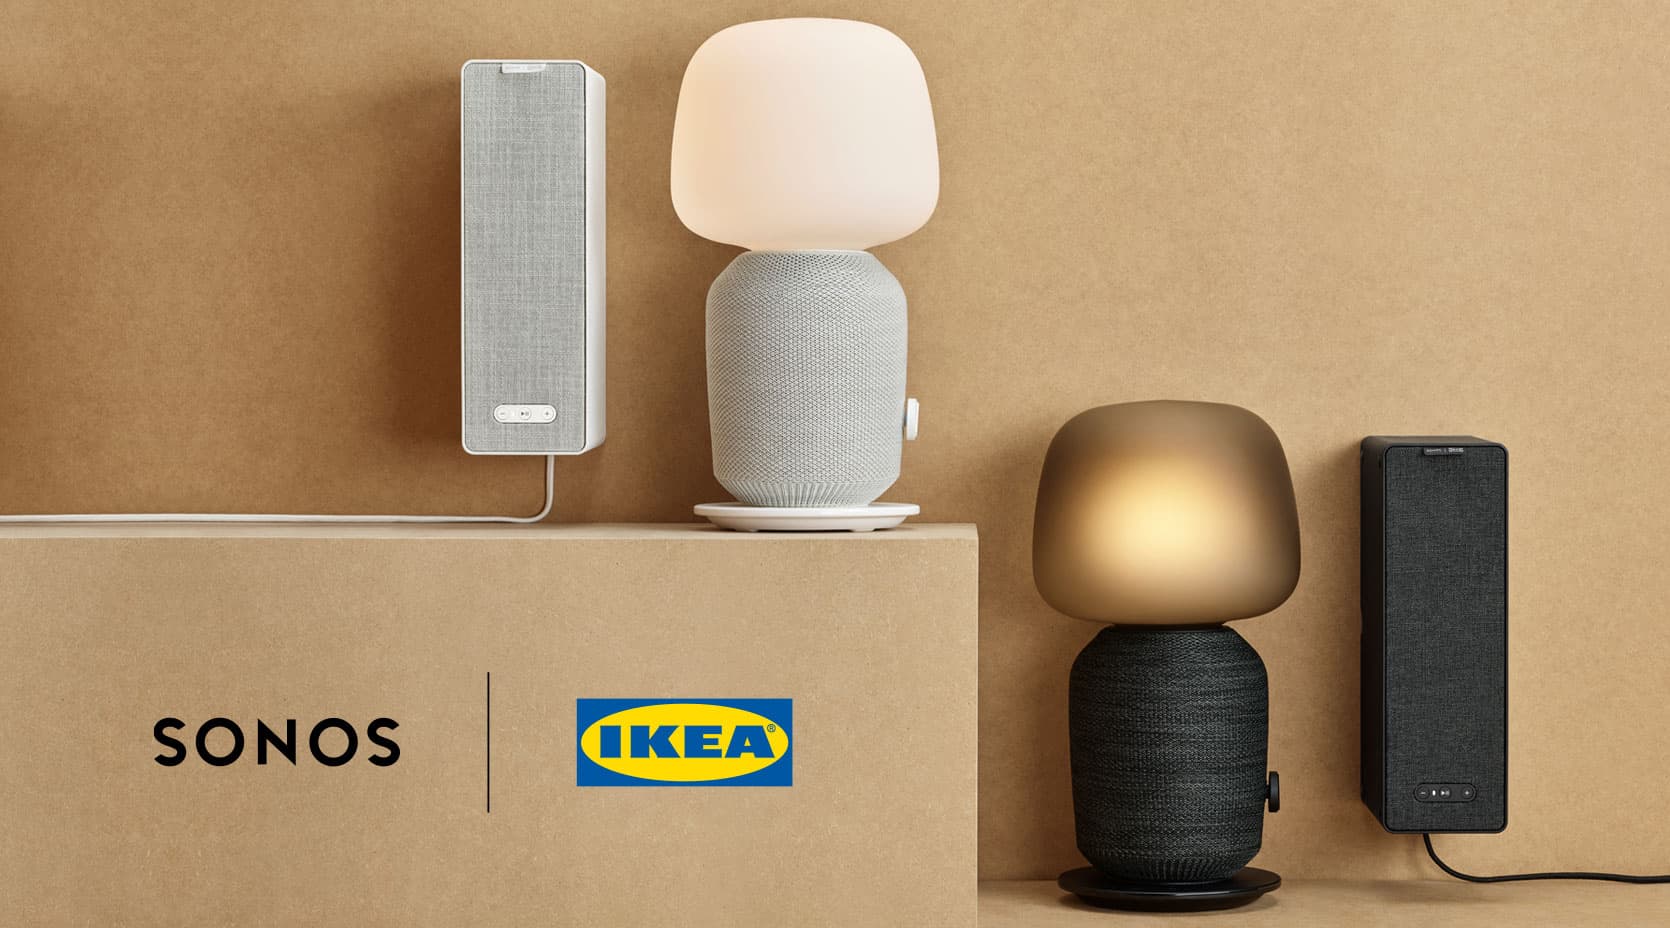 Sonos speakers come as a lamp now